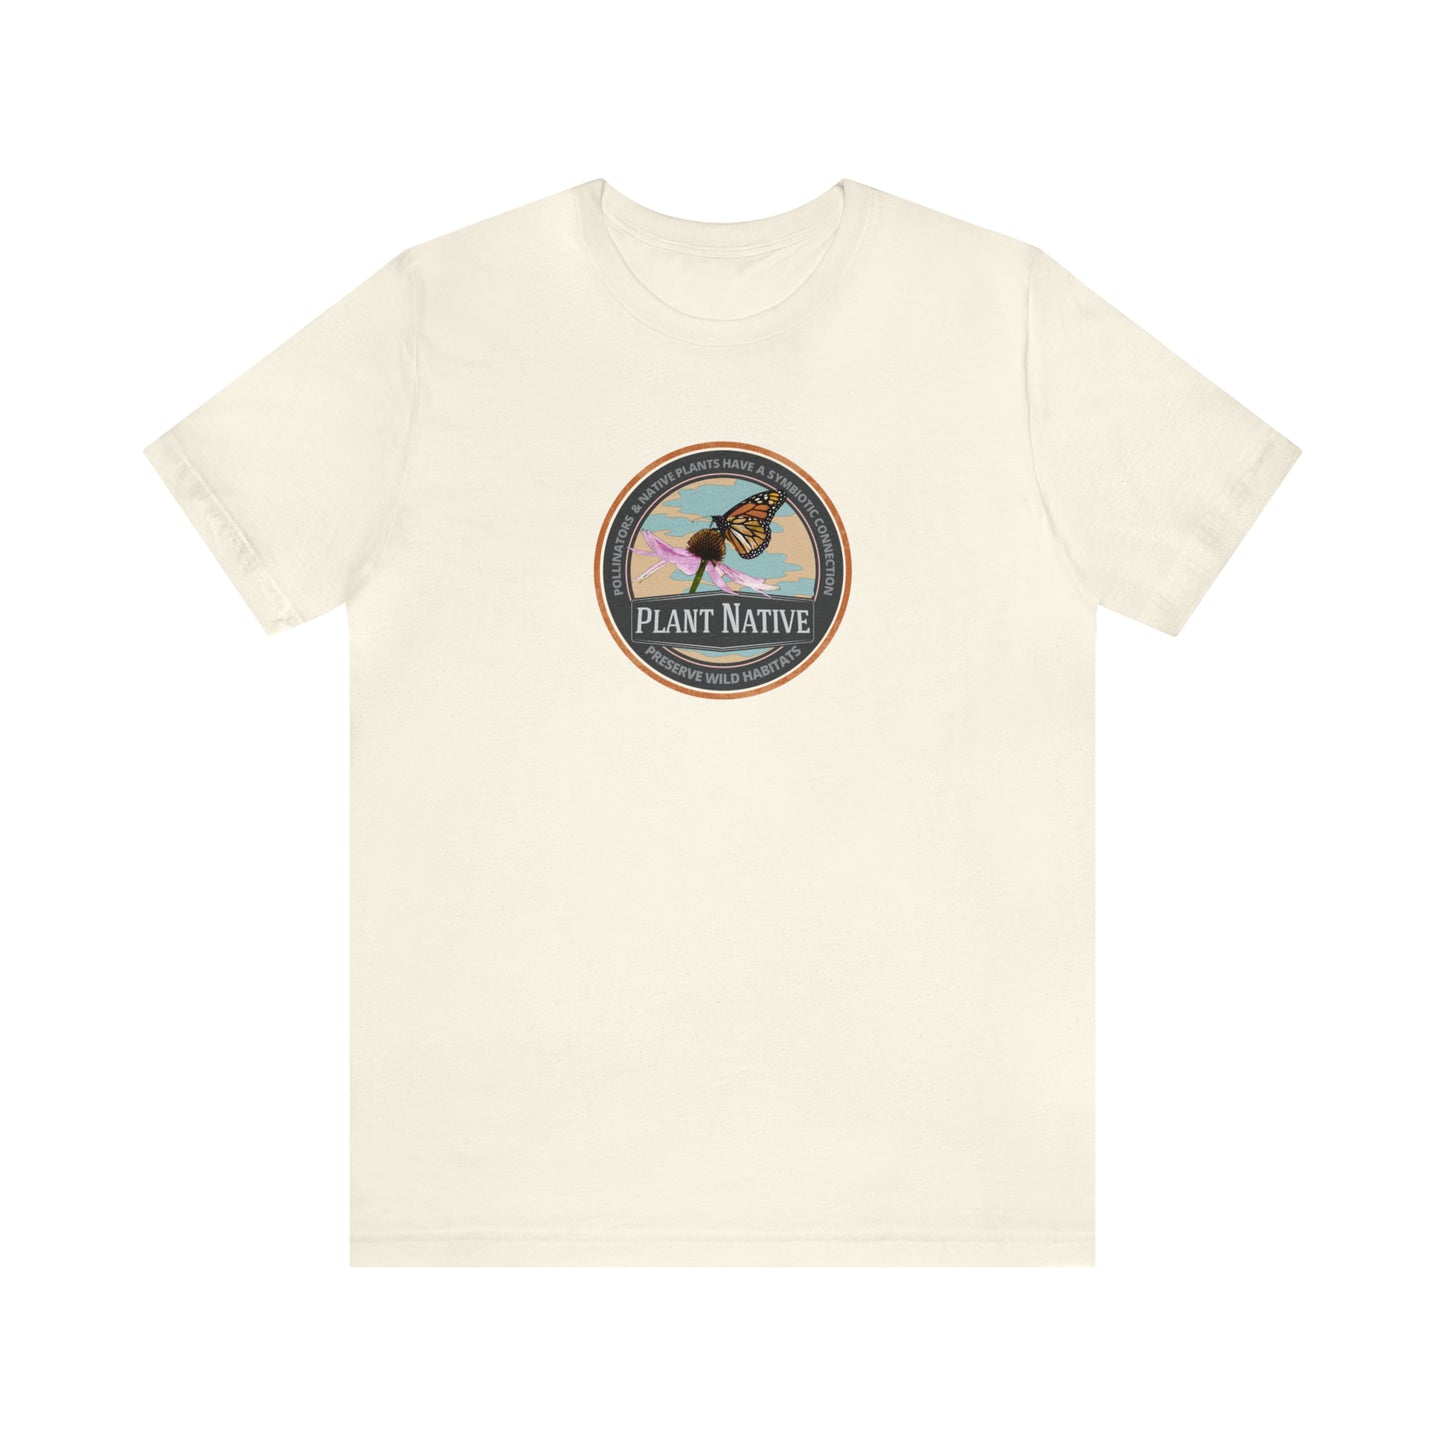 Pollinators Need Wildflowers tee, Nature t-shirt for conservation, ecology, Environmental science gift for ecological teachers, gardeners